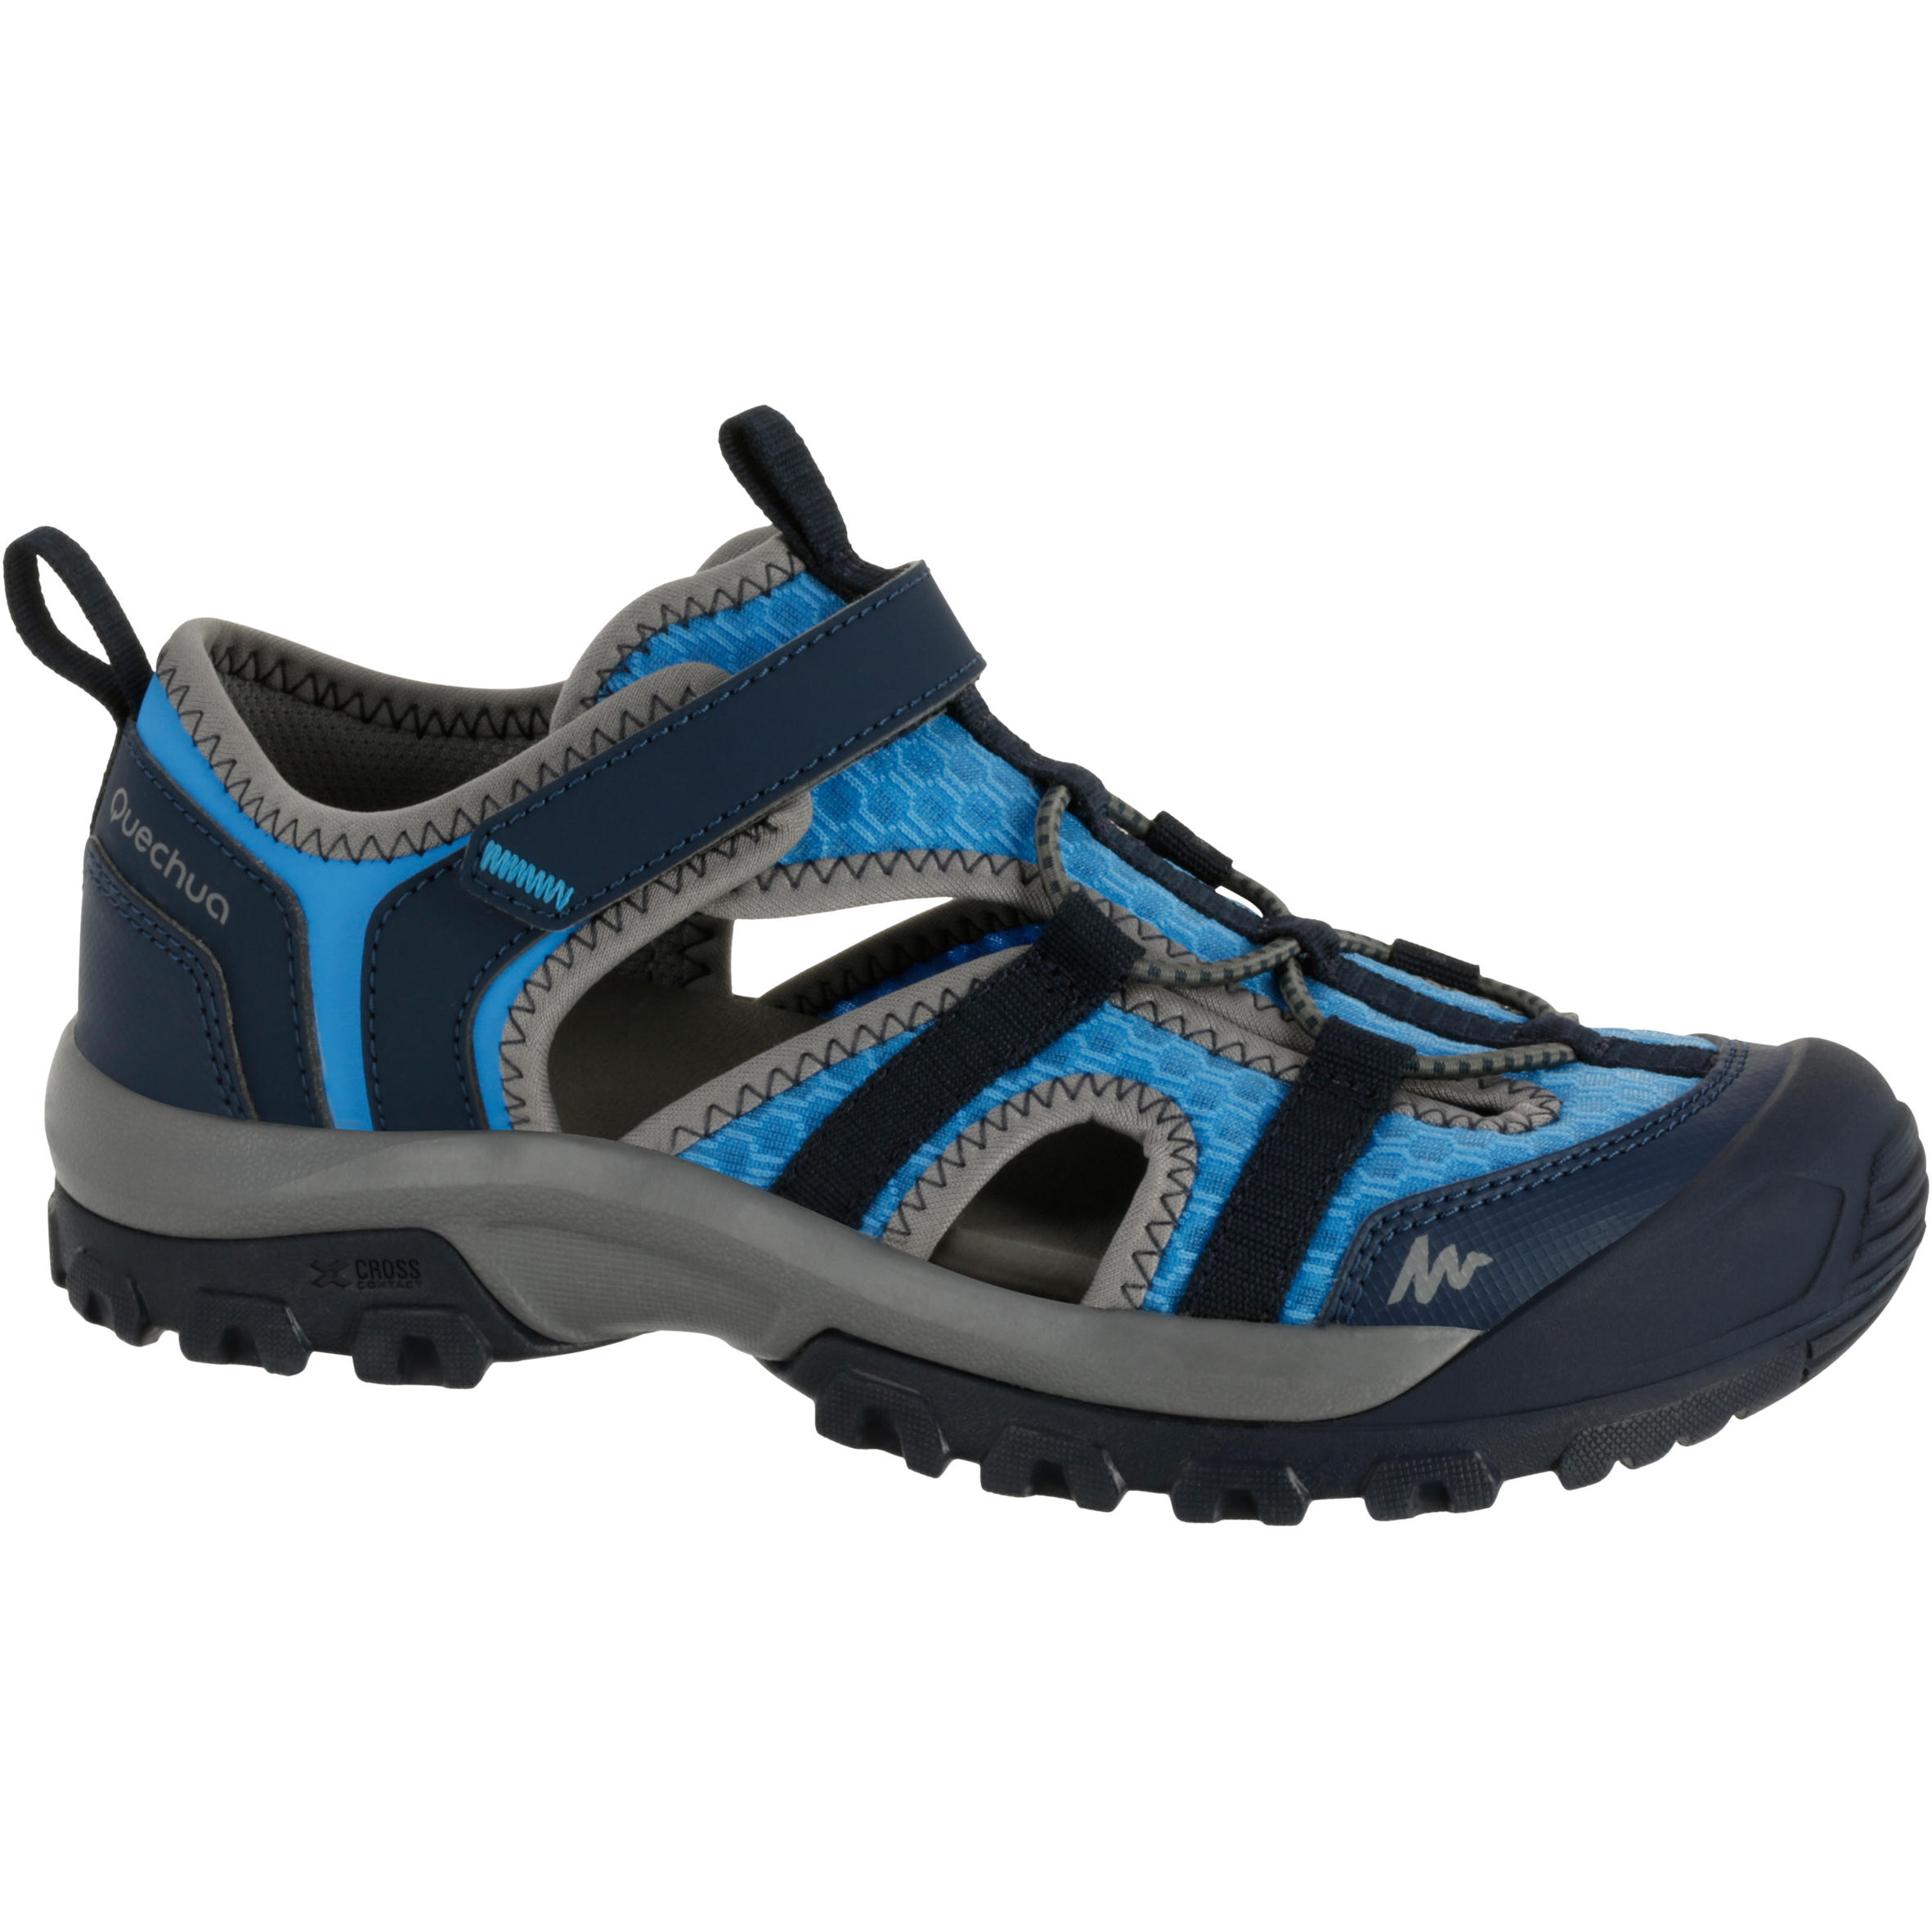 Kids’ Hiking Sandals MH150 - size 10 to 6 - Blue 1/8